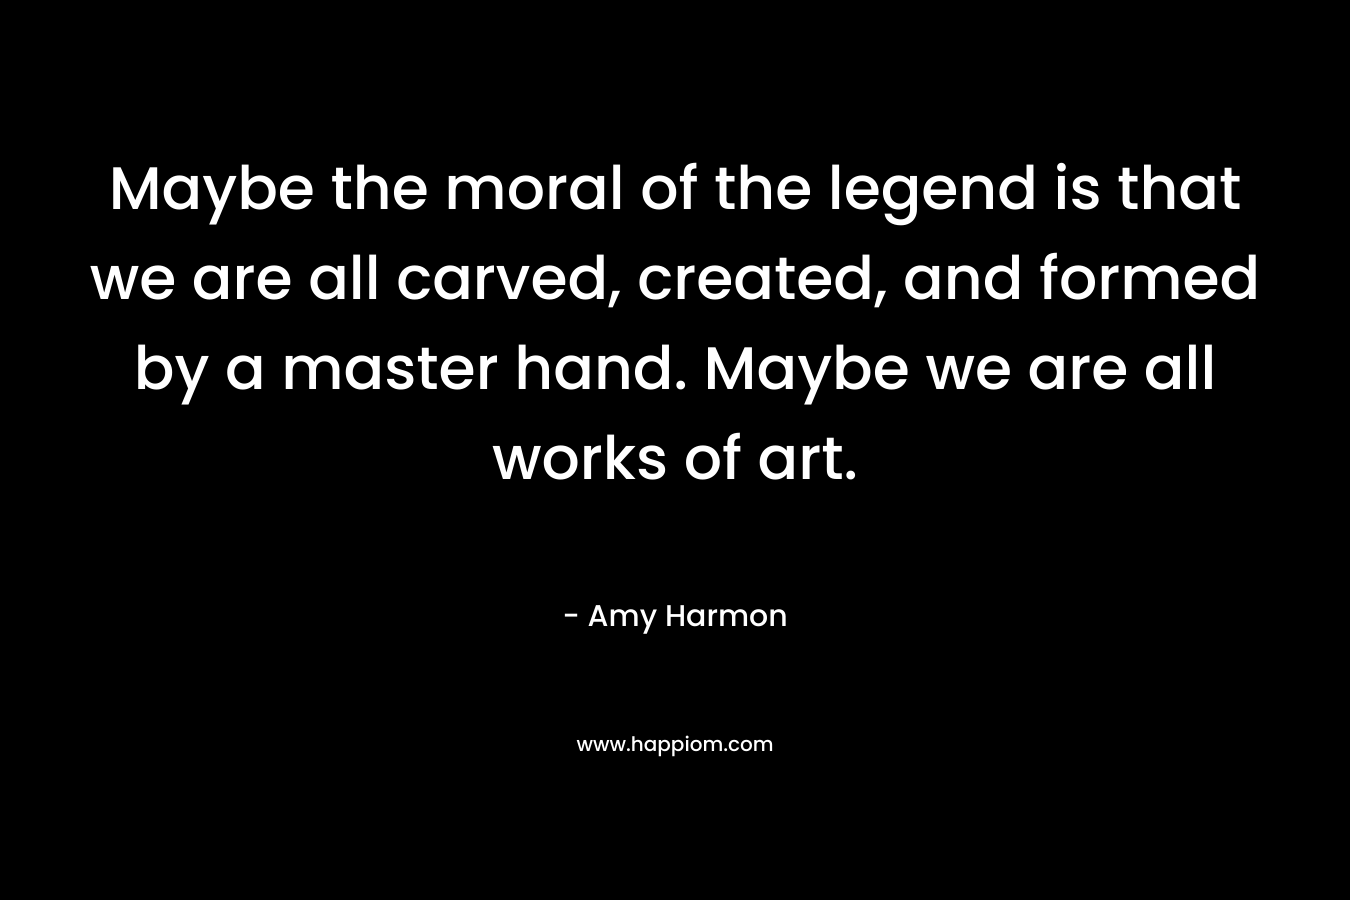 Maybe the moral of the legend is that we are all carved, created, and formed by a master hand. Maybe we are all works of art. – Amy Harmon